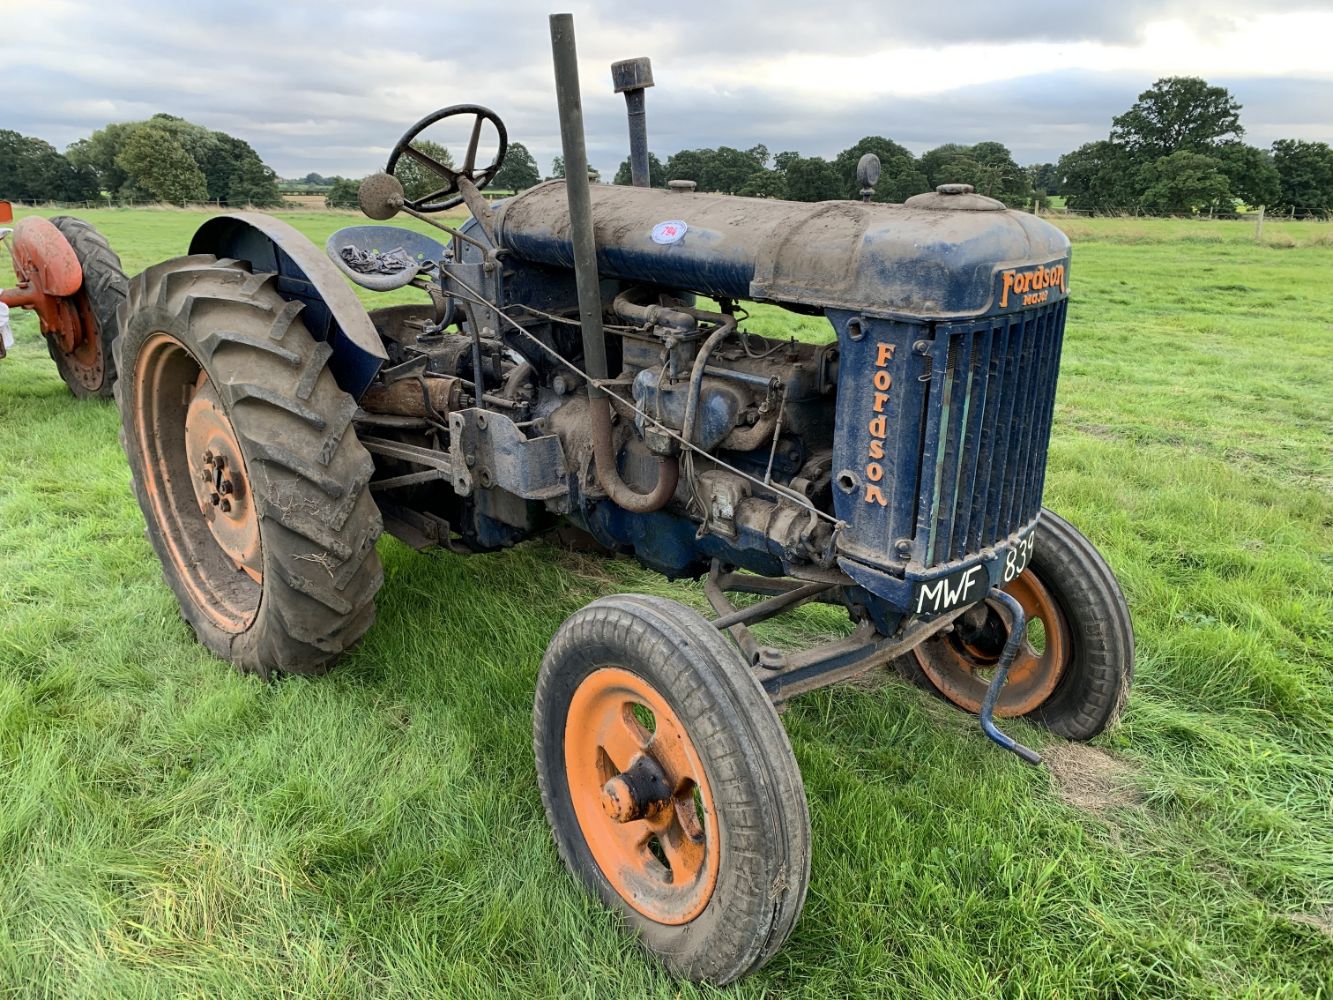 PARK FARM, ALNE, EASINGWOLD, YO61 1RN - 19th Annual Collective Sale of Farm Machinery, Equipment, Vintage Machinery & Bygones